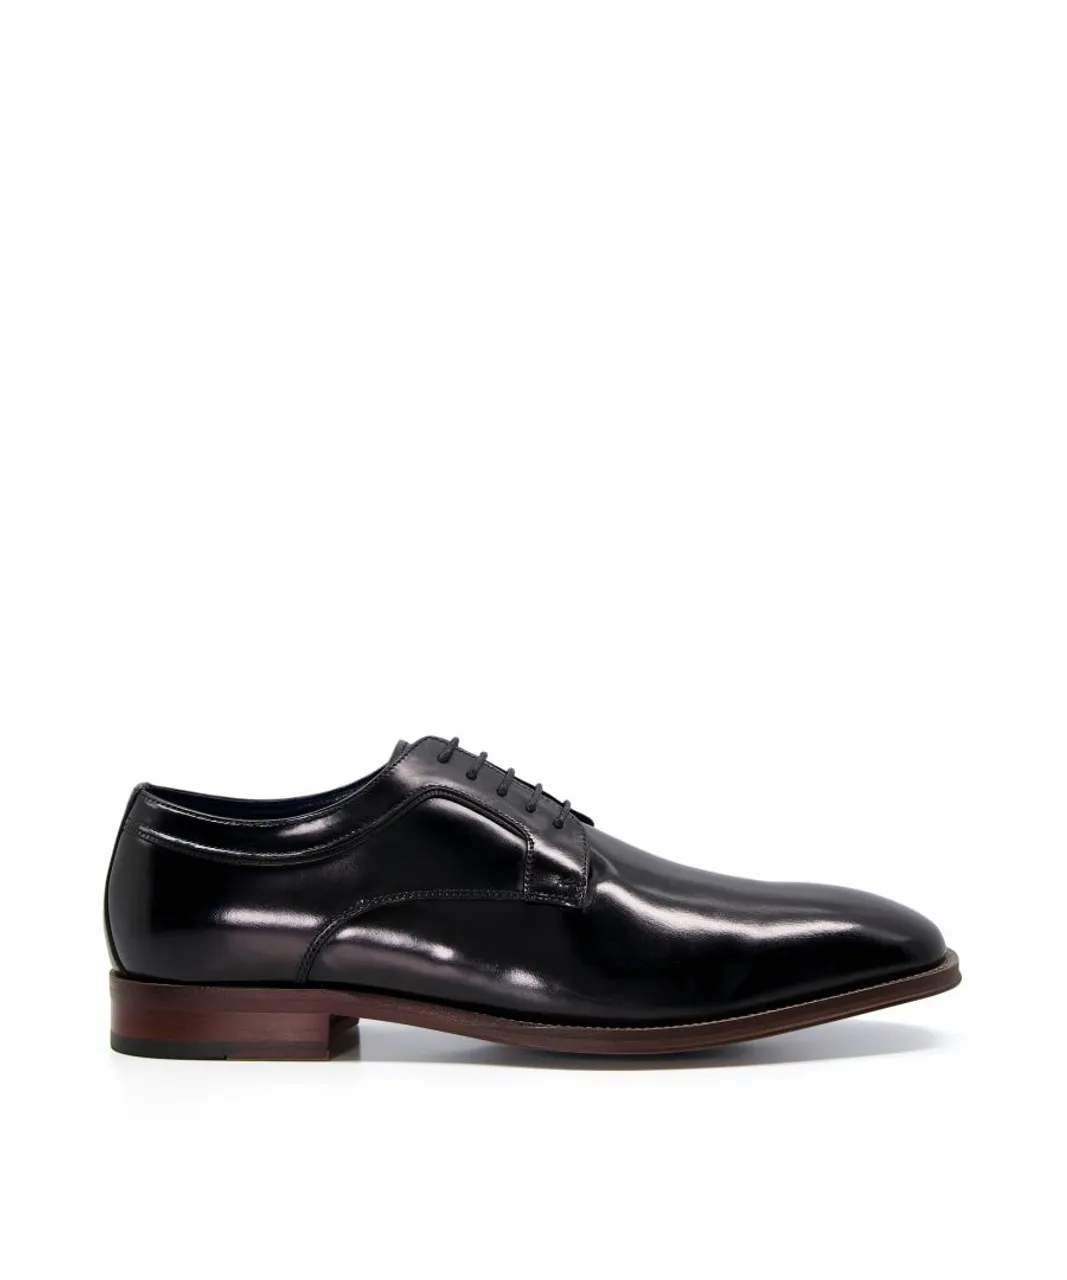 Dune London Mens WF SPARROWS Leather Lace-Up Gibson Shoes - Black (archived)